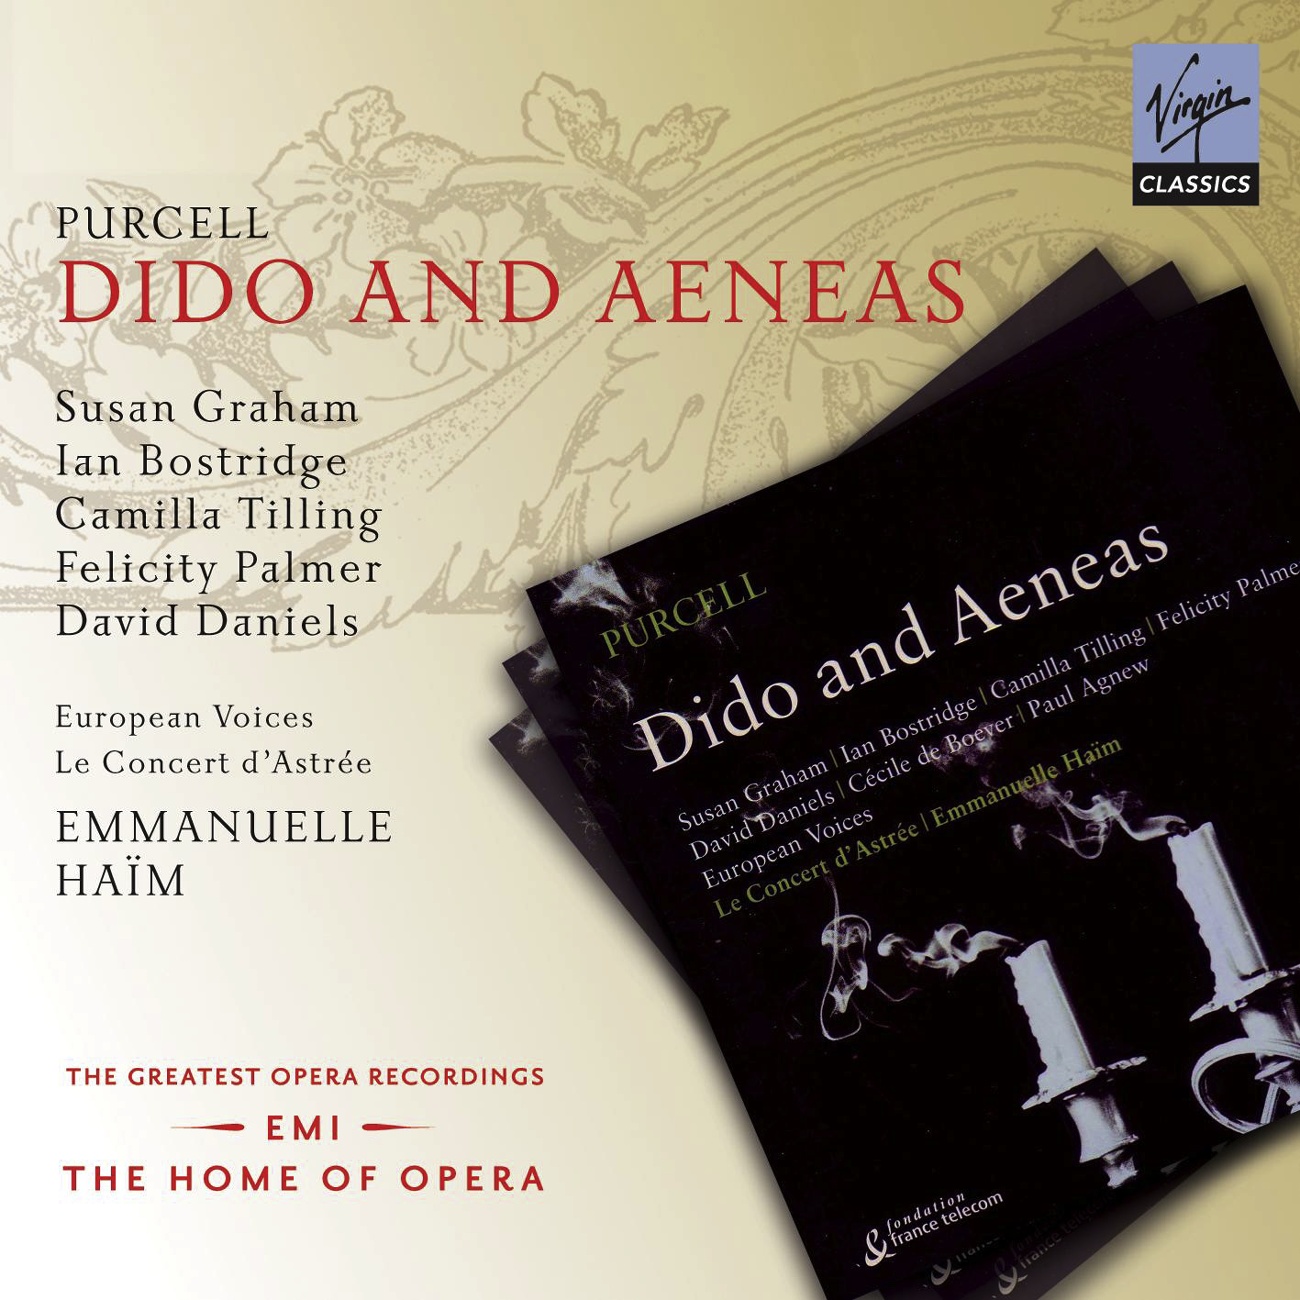 Dido and Aeneas, ACT 2, Scene 2: The Grove: Stay, Prince, and hear Great Jove's Command (Spirit-Aeneas)